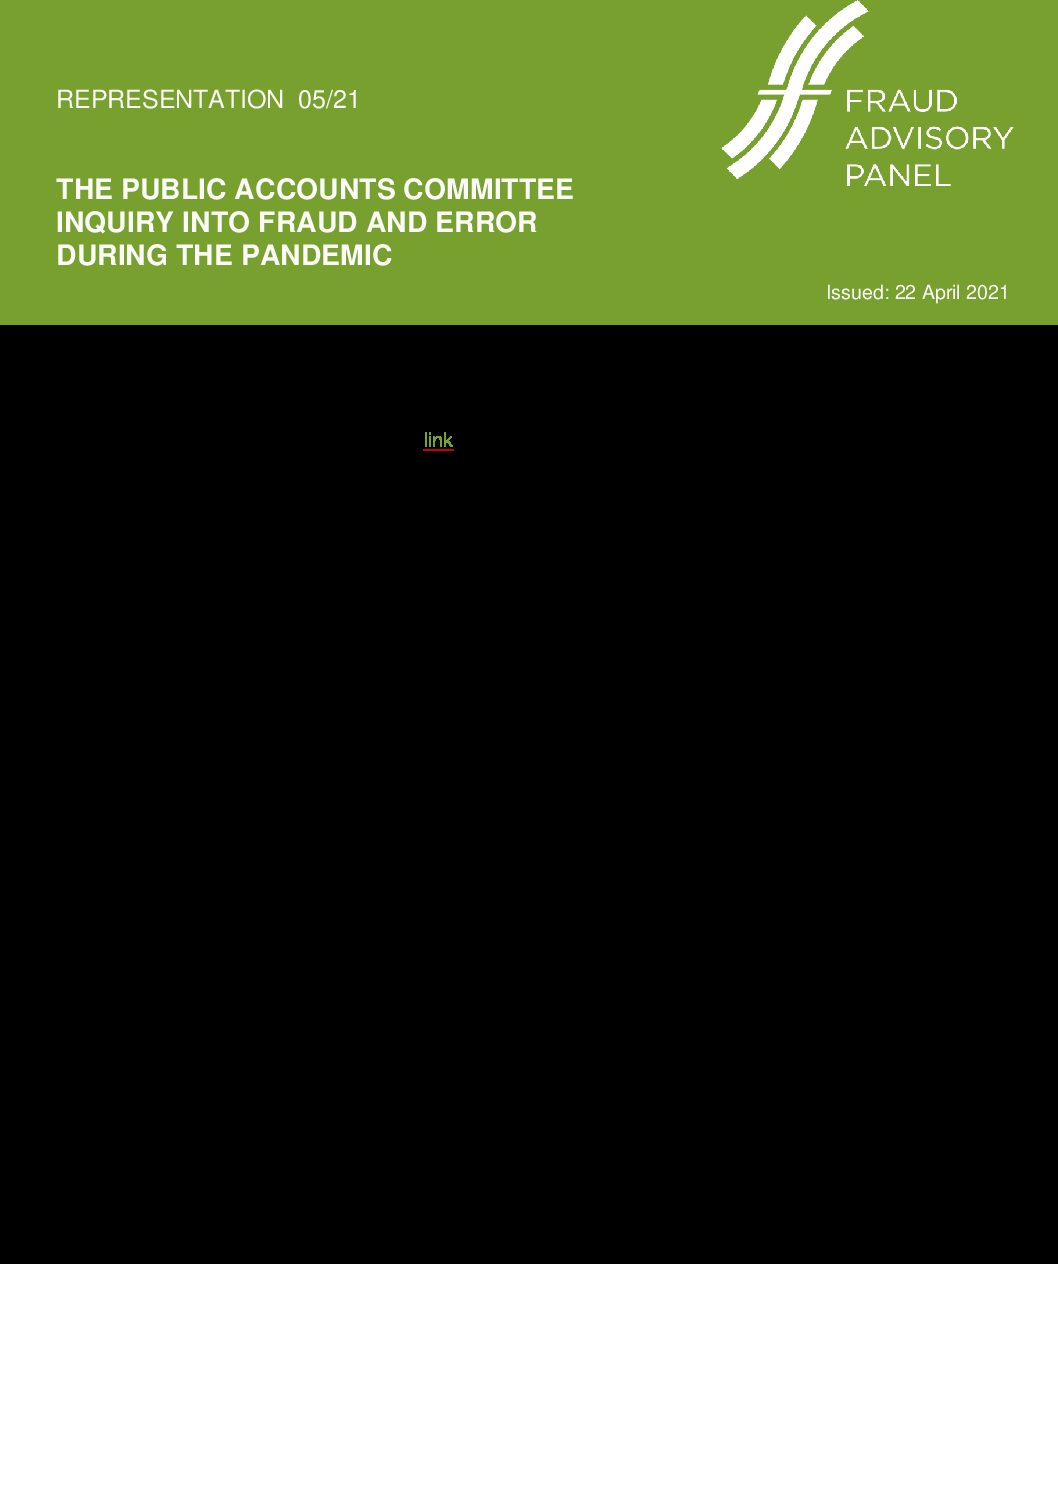 FAP Response to PAC fraud and error in pandemic (Final WEB) 22Apr21 document cover